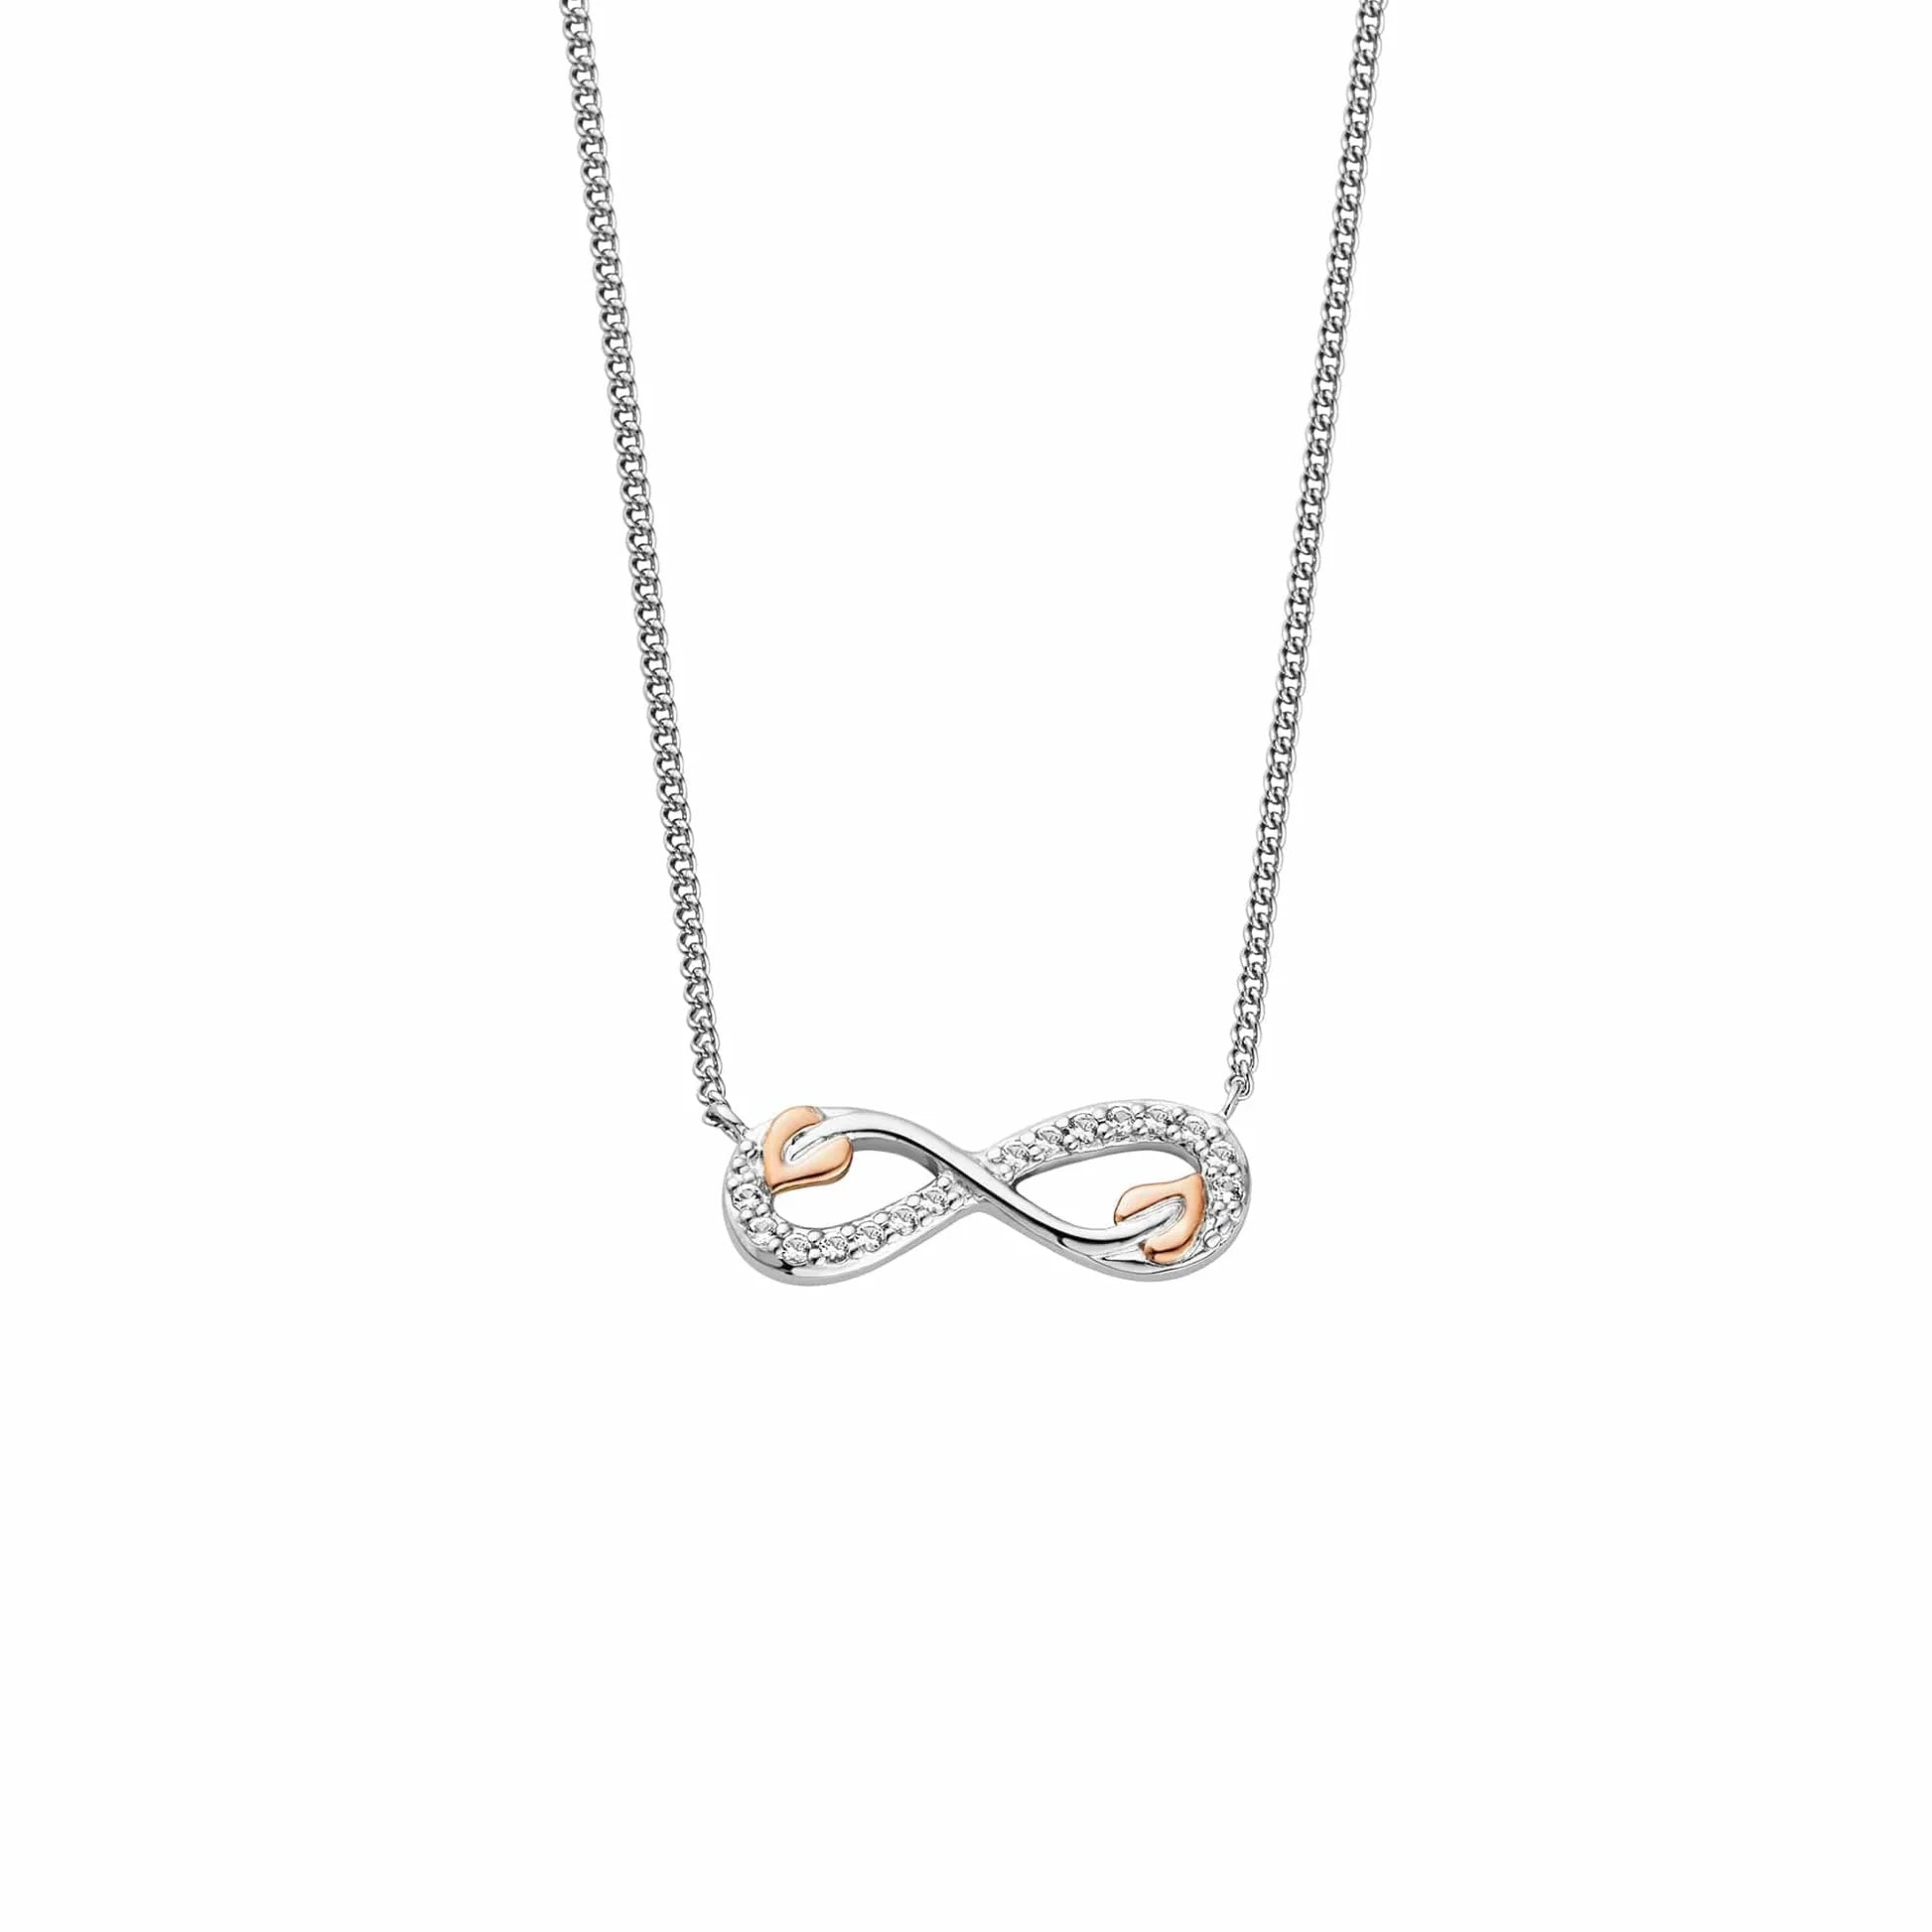 Clogau Silver Infinity Necklace